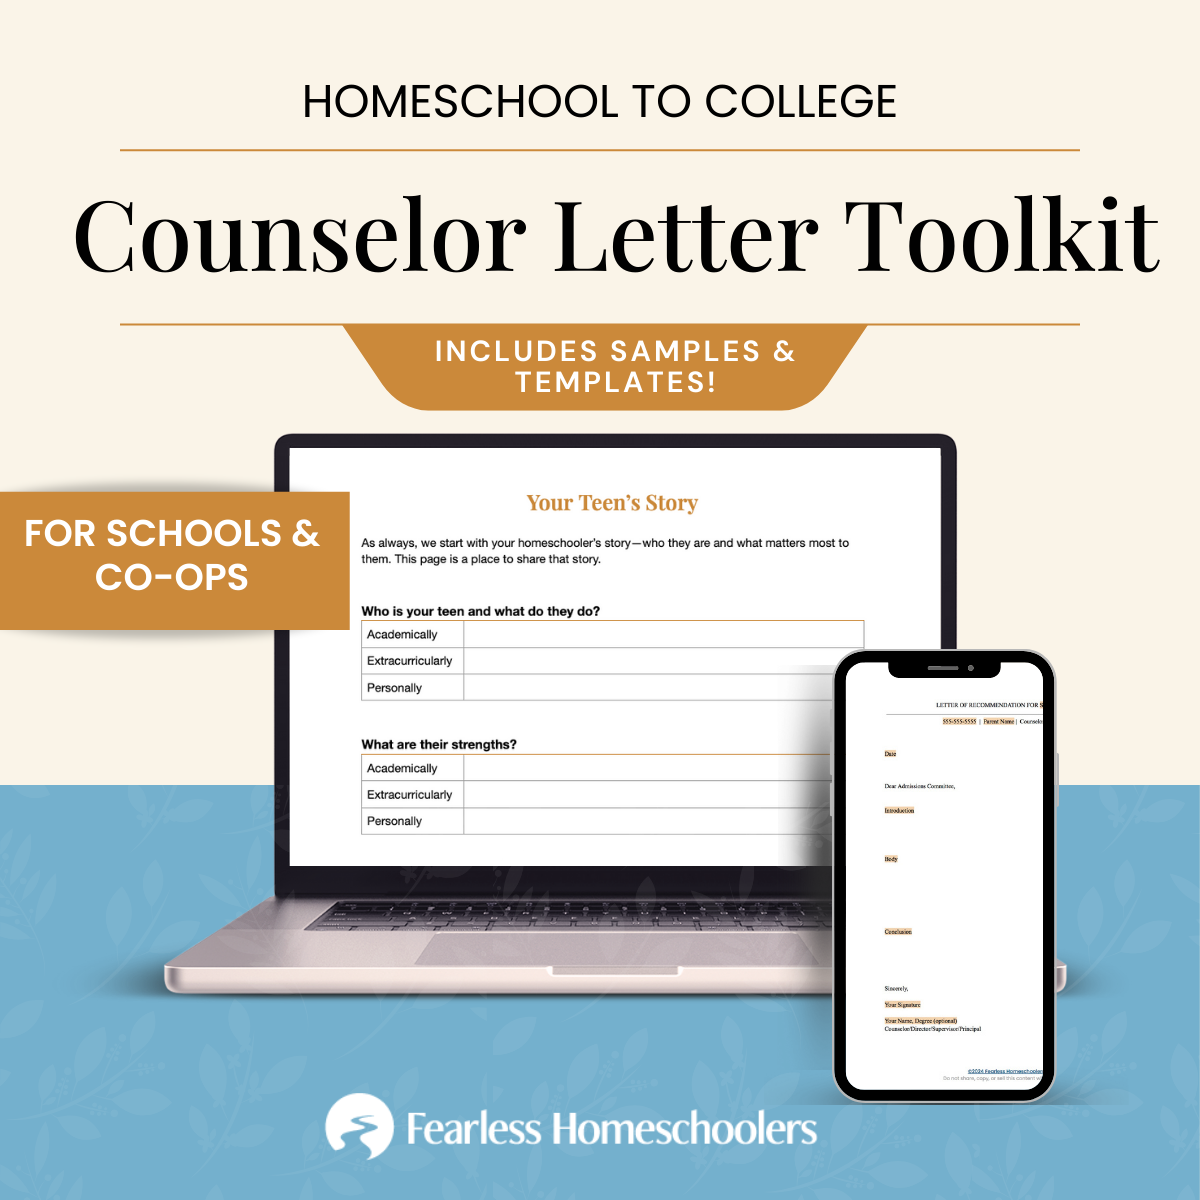 Homeschool Counselor Letter Template for co-ops